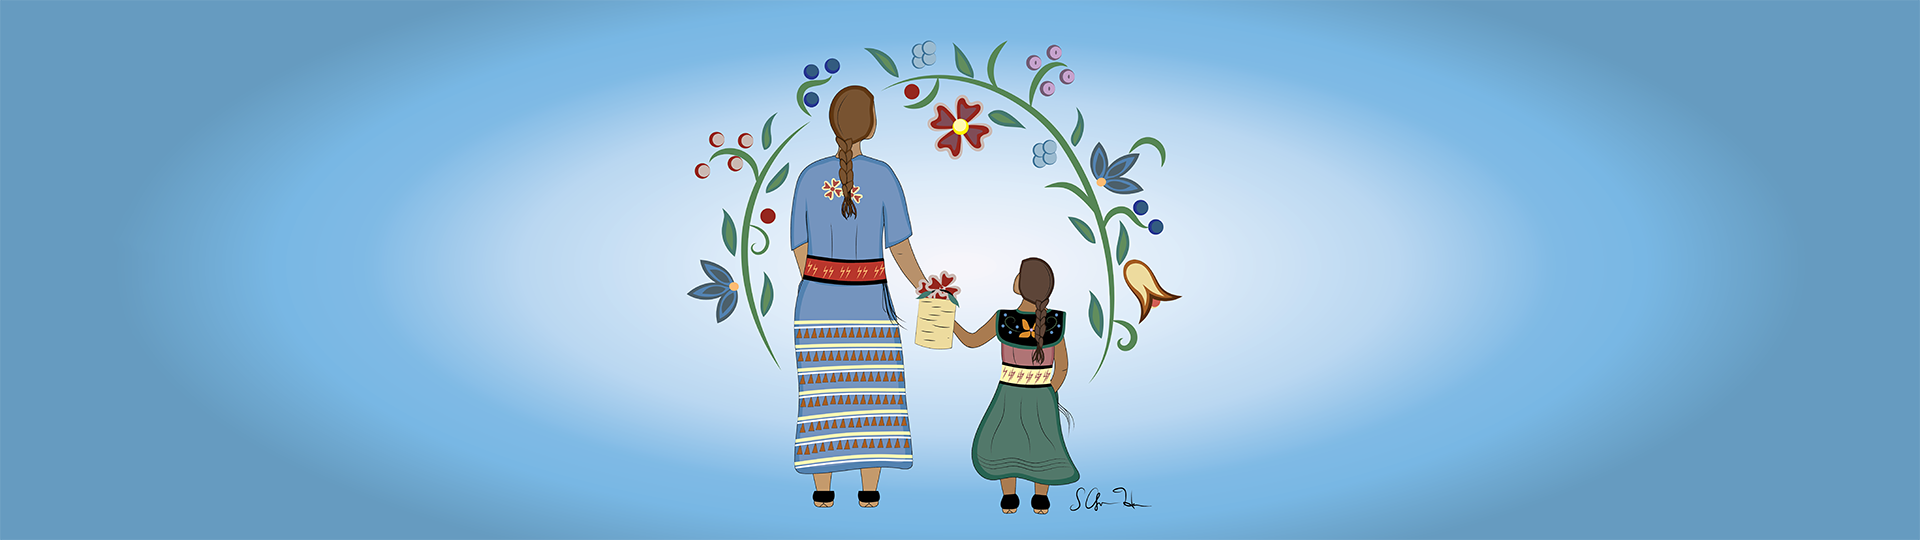 illustration of mother and daughter holding hands, artist: Sarah Agaton Howes